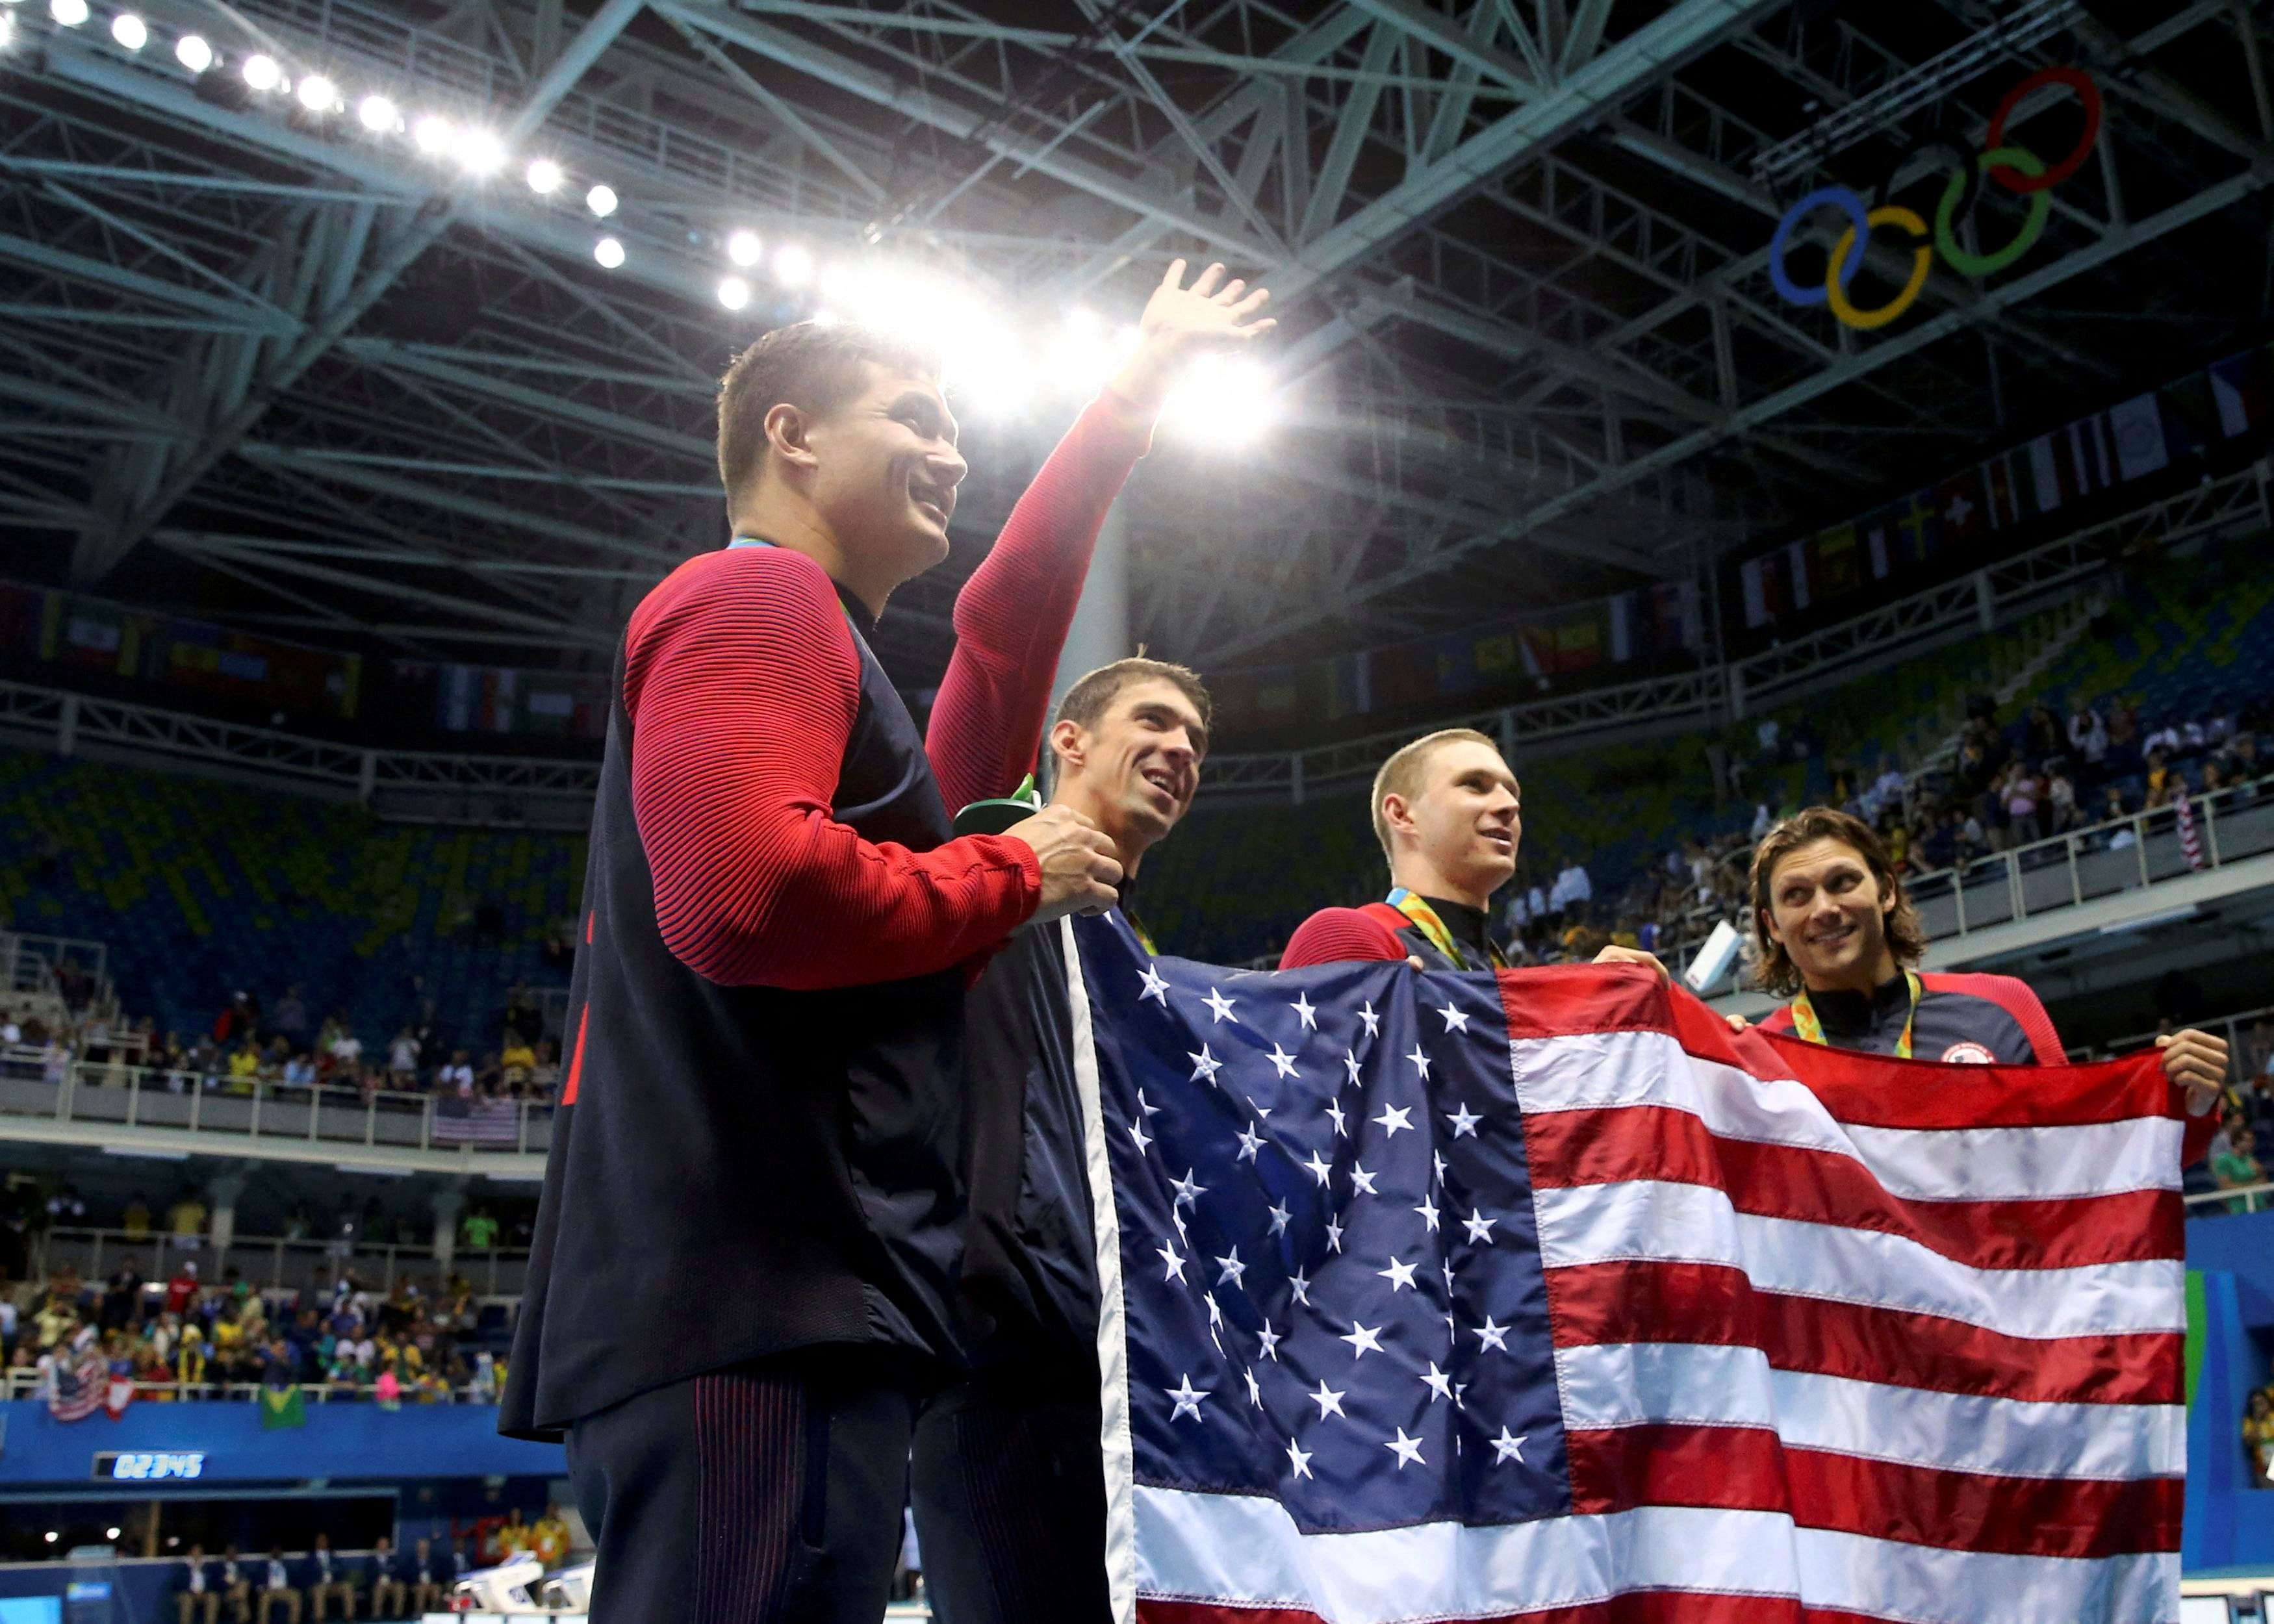 FILE PHOTO: 2016 Rio Olympics - Swimming - Victory Ceremony - Men's 4 x 100m Medley Relay Victory Ceremony - Olympic Aquatics Stadium - Rio de Janeiro, Brazil - 13/08/2016. Team USA celebrates their gold win. REUTERS/Marcos Brindicci/File Photo FOR EDITORIAL USE ONLY. NOT FOR SALE FOR MARKETING OR ADVERTISING CAMPAIGNS.